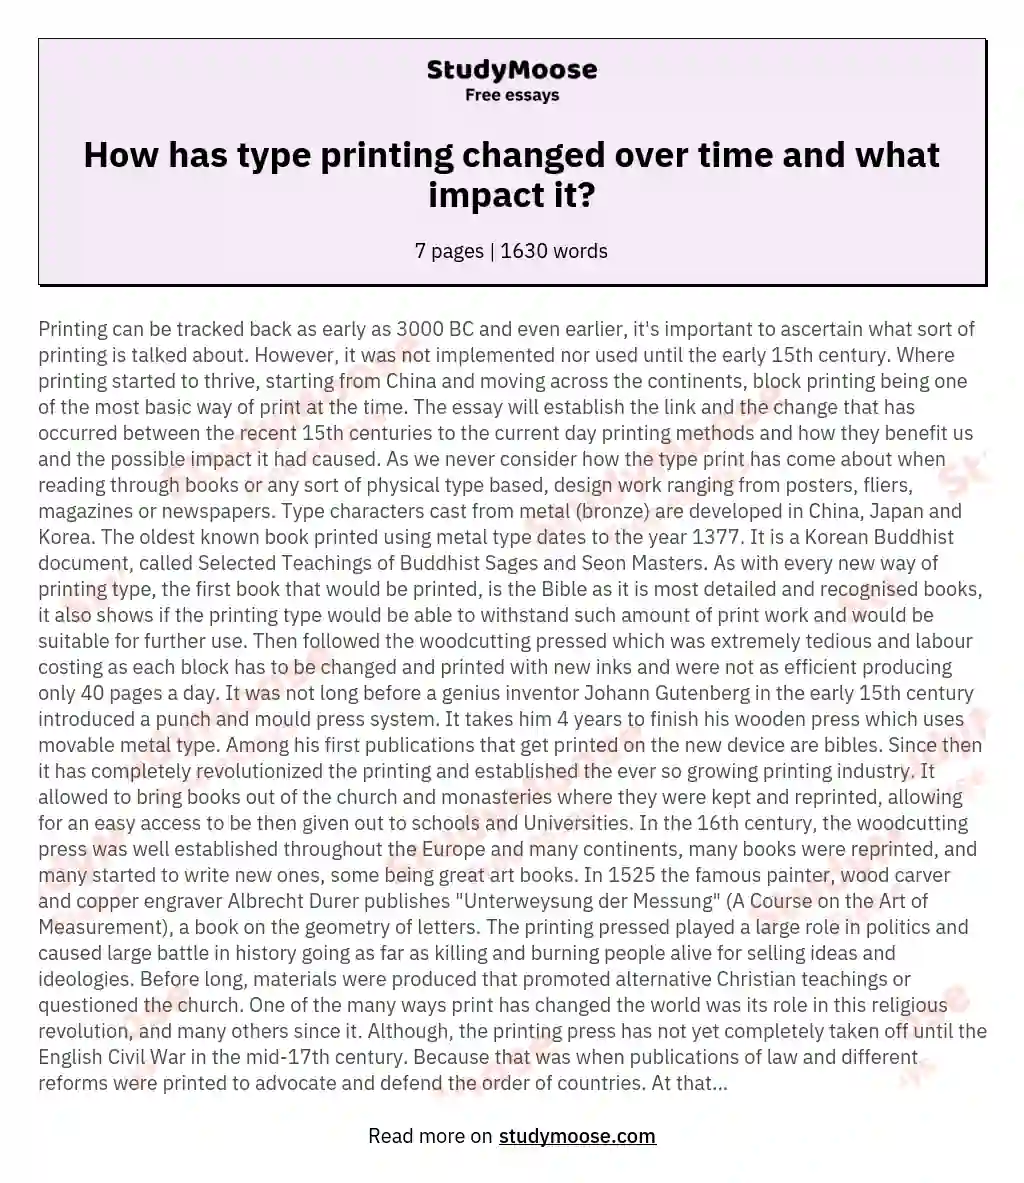 How has type printing changed over time and what impact it? essay